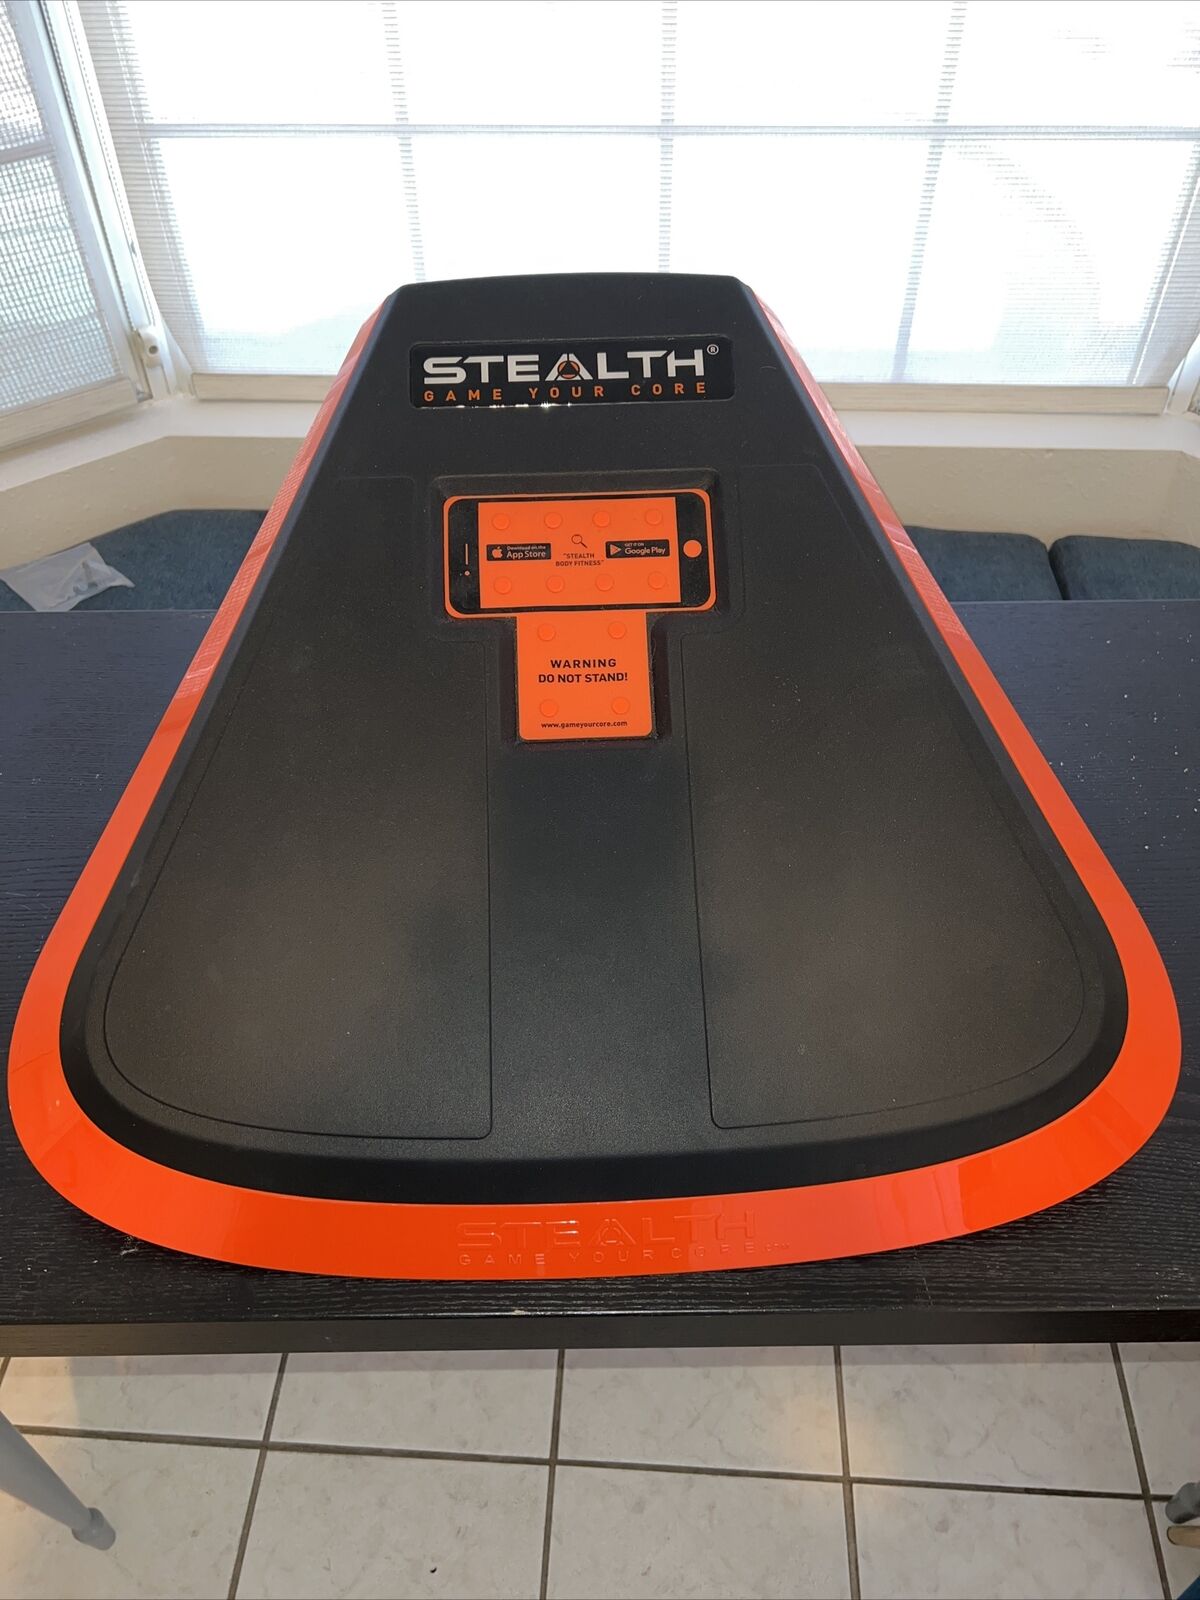 Stealth Core Trainer Safety and trust Max 69% OFF Game Your Worko Total Fitness Orange